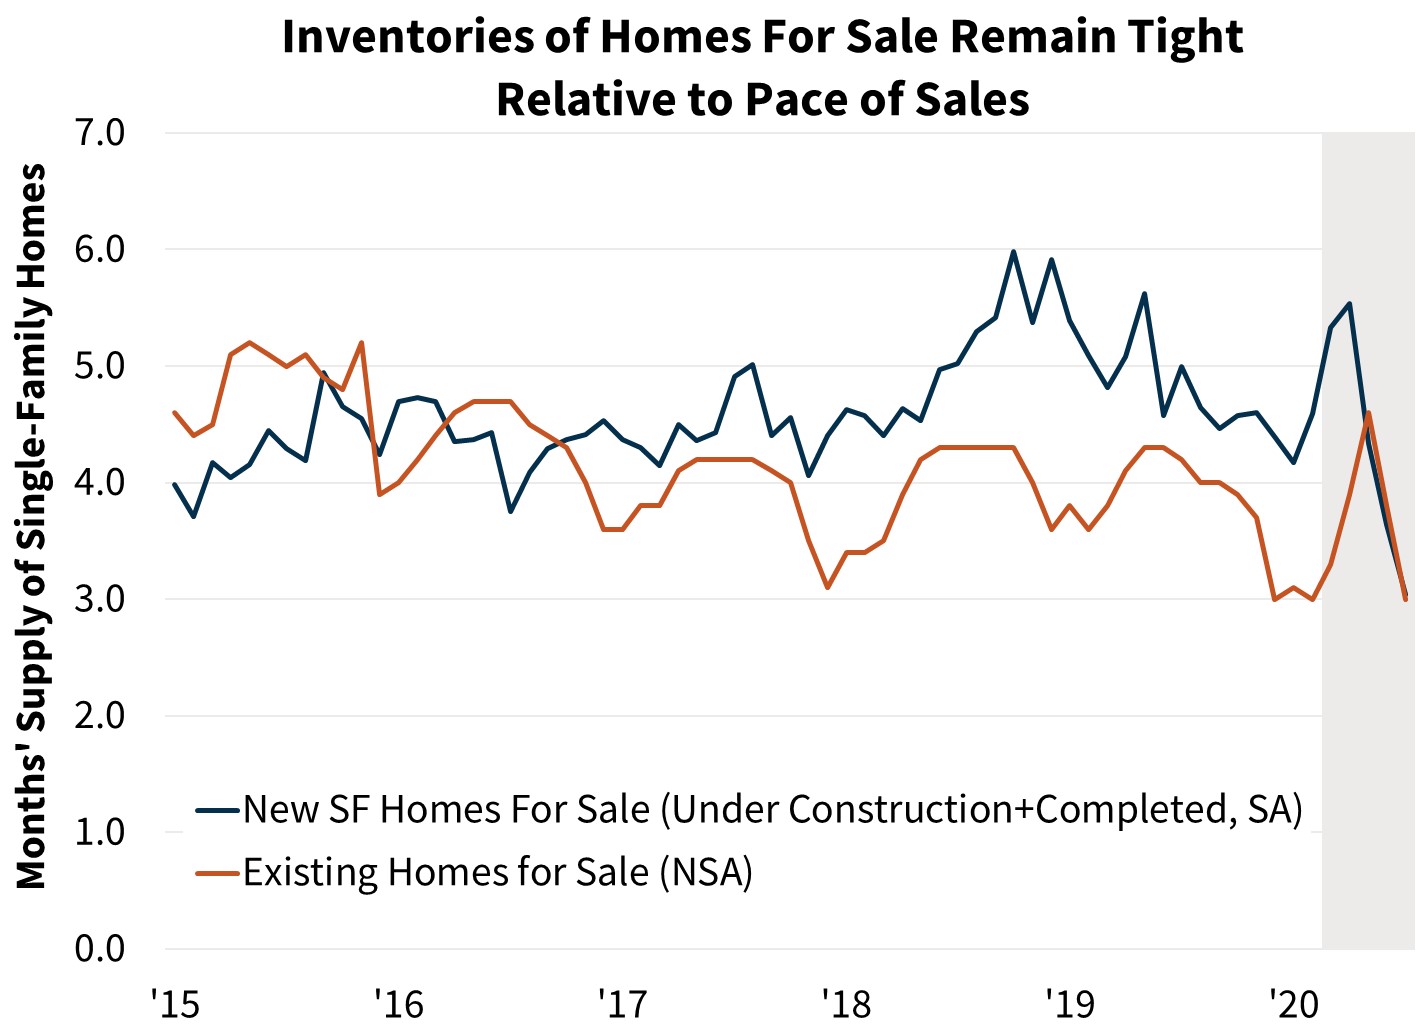  Inventories of Homes For Sale Remain Tight Relative to Pace of Sales 